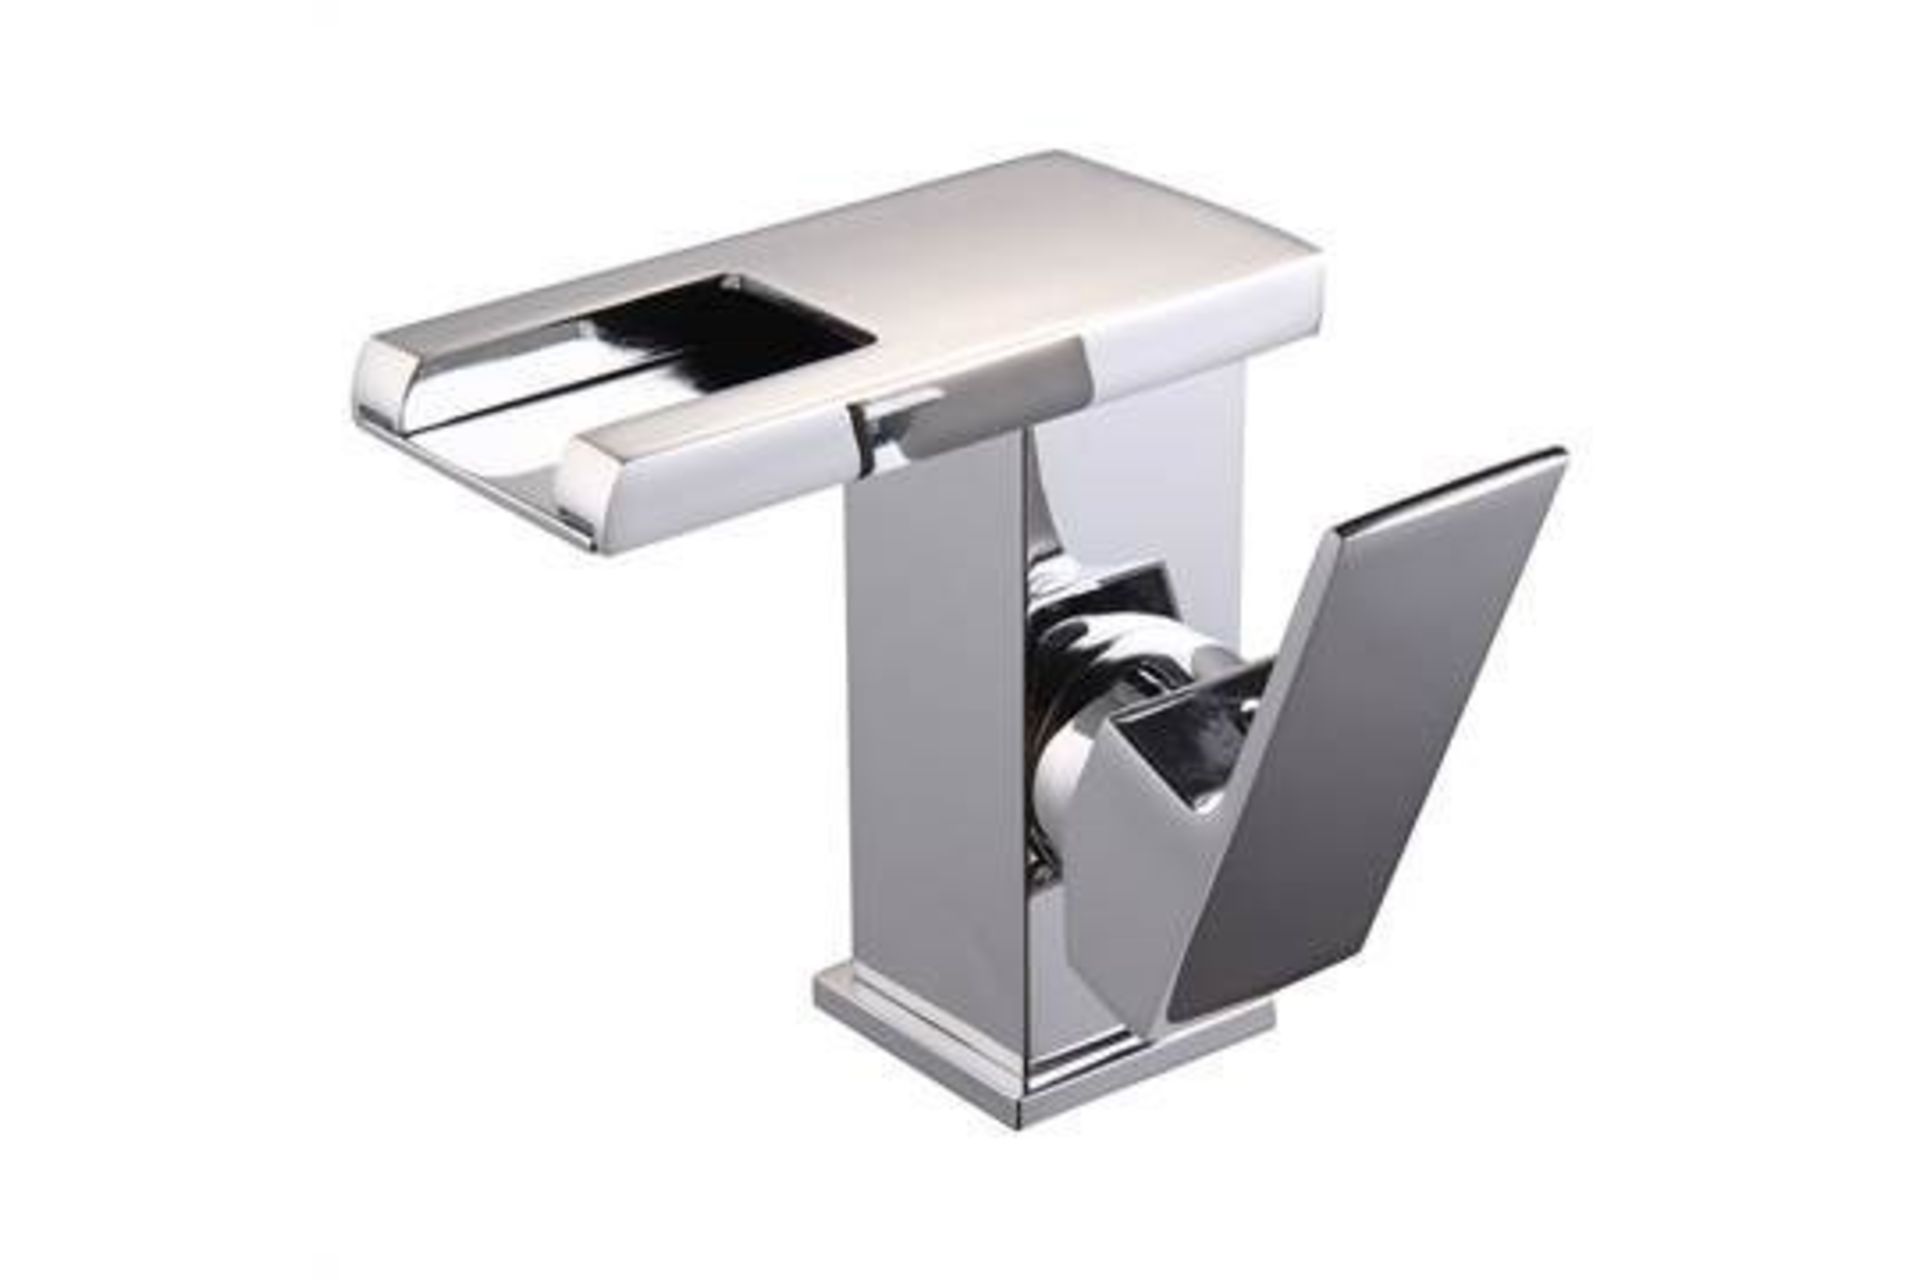 (M1098) LED Waterfall Bathroom Basin Mixer Tap. RRP £229.99.Easy to install and clean. All c... - Image 3 of 3